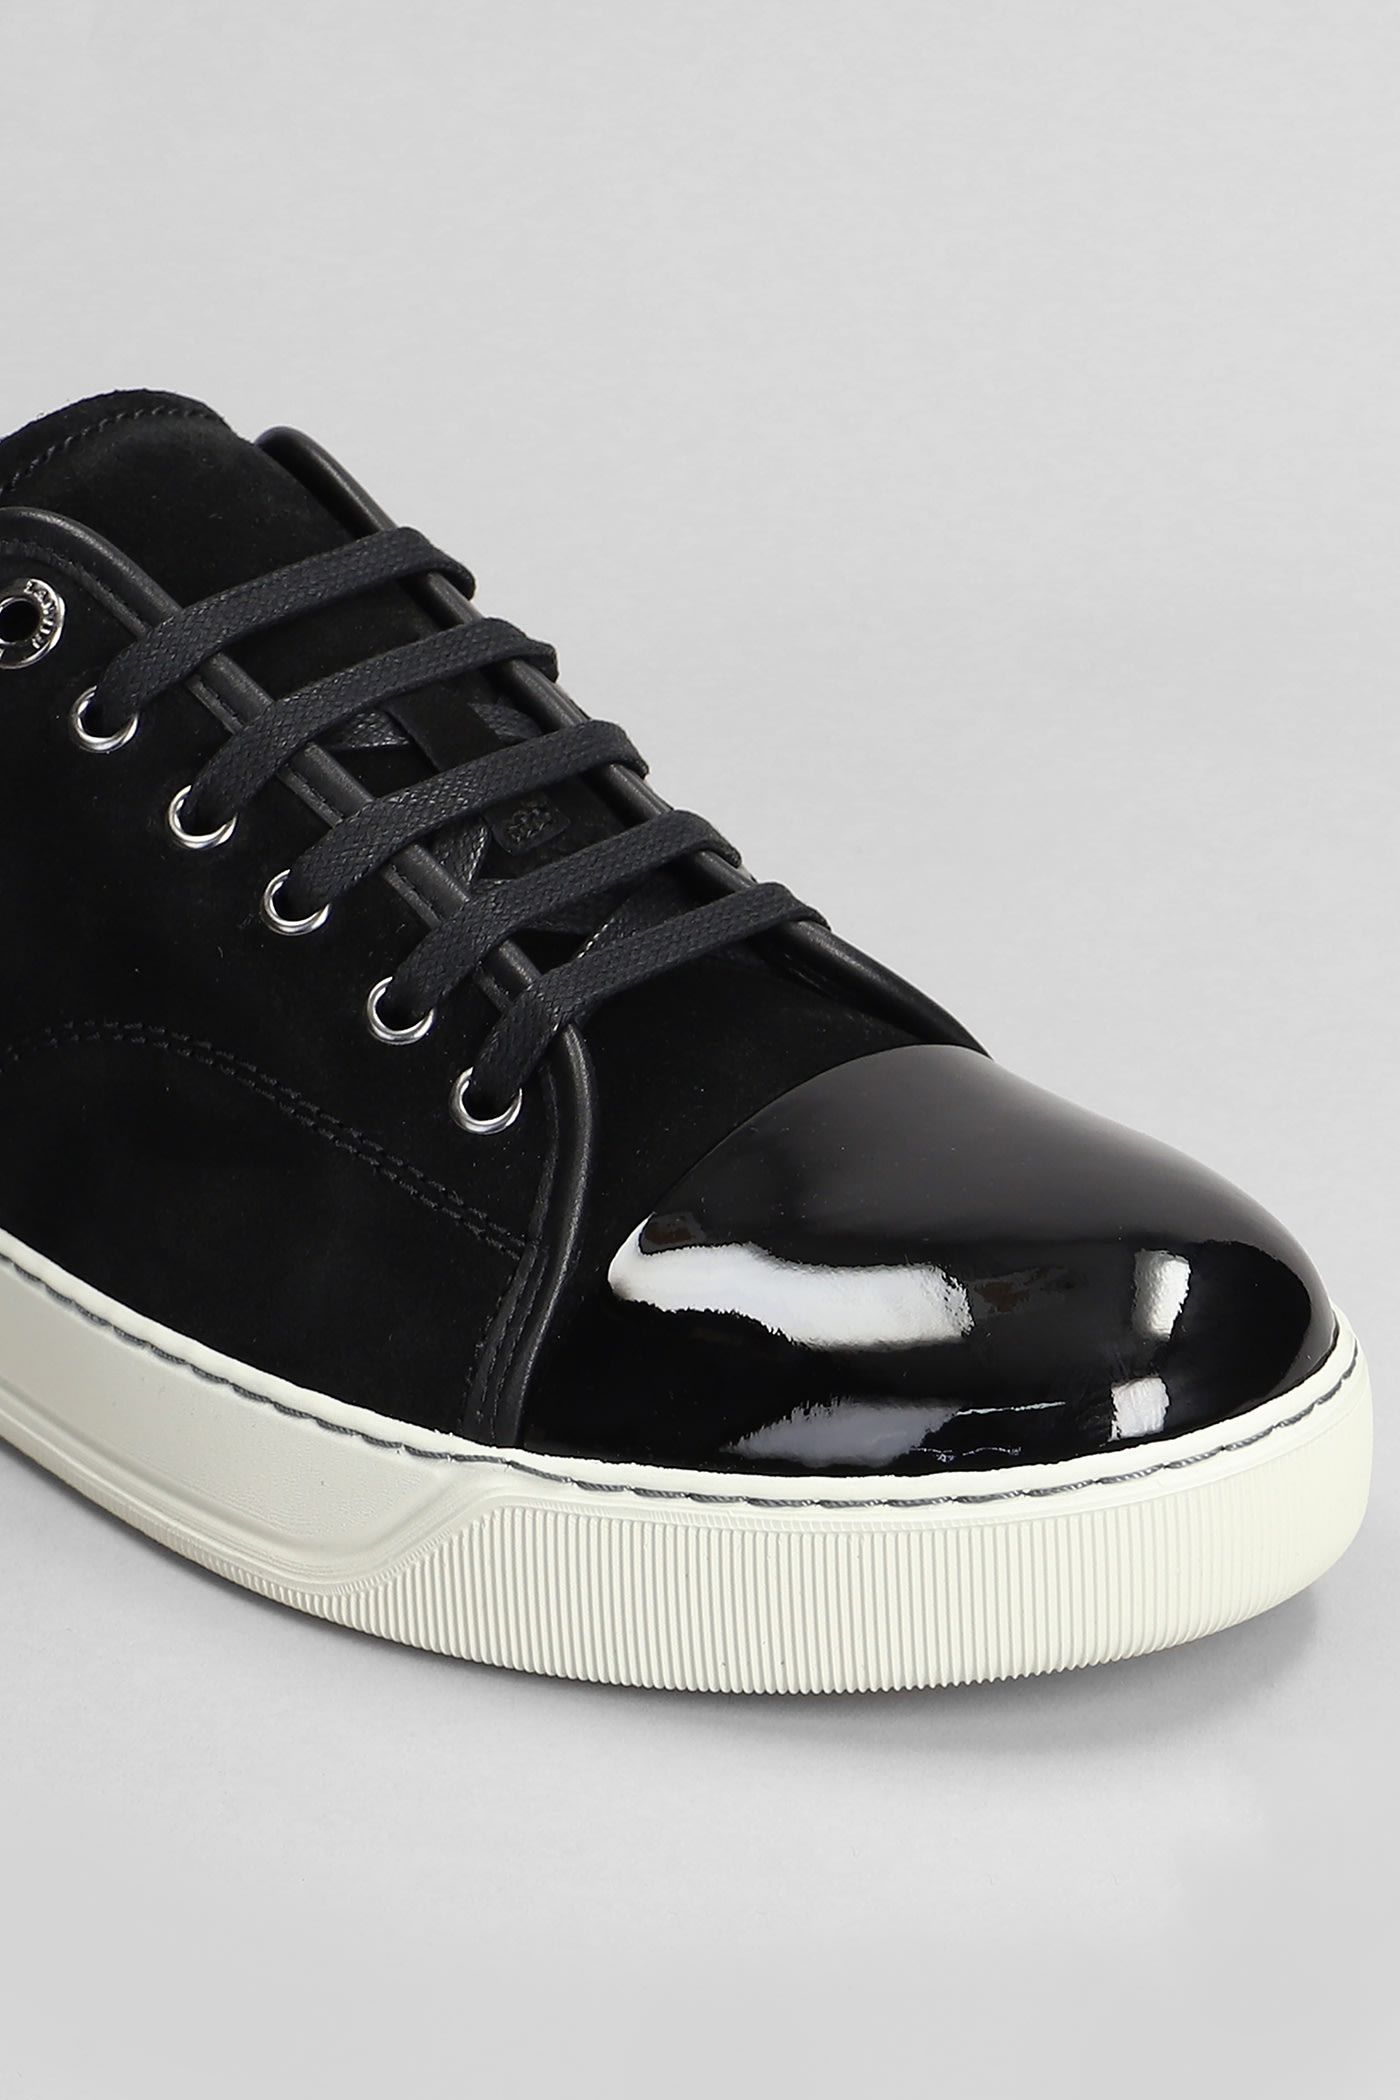 Shop Lanvin Dbb1 Sneakers In Black Suede And Leather